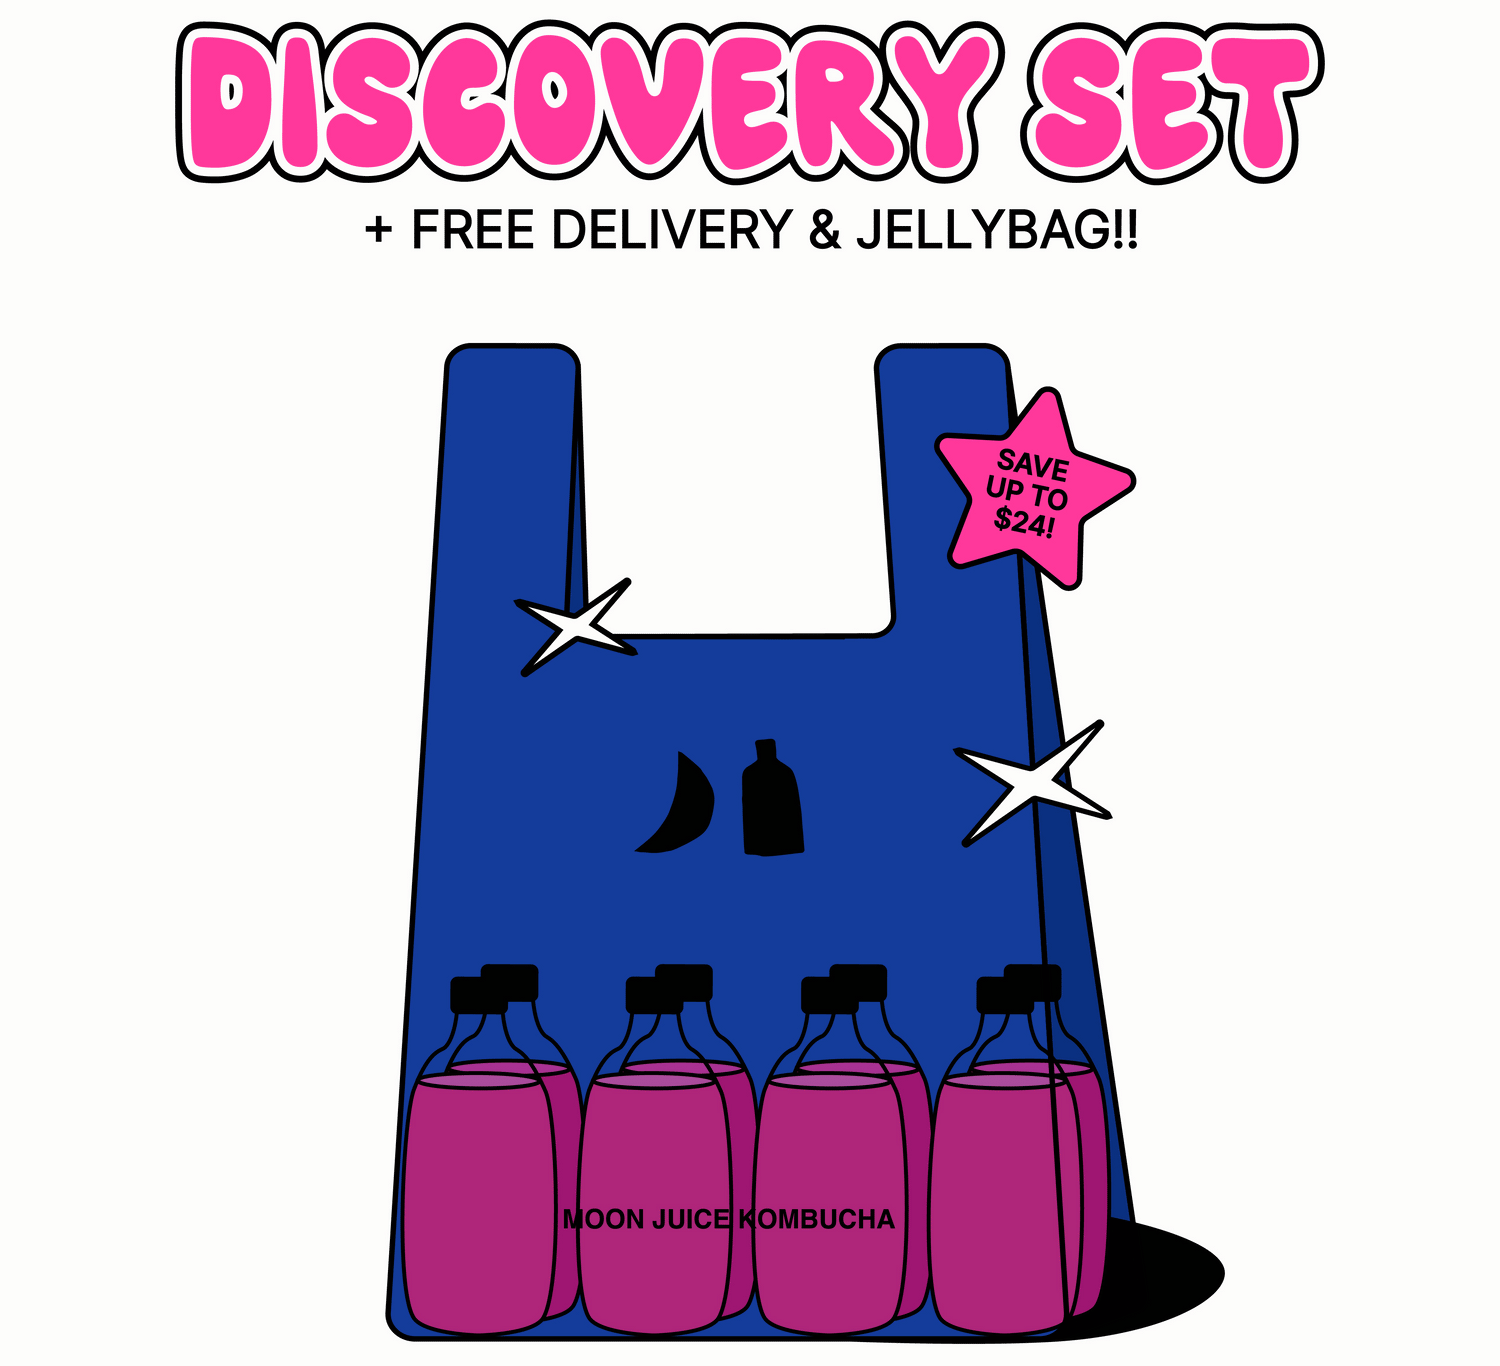 Discovery Set. Free delivery & jellybag! Save up to $24. Image is a vector drawing of a jellybag with 8 bottles